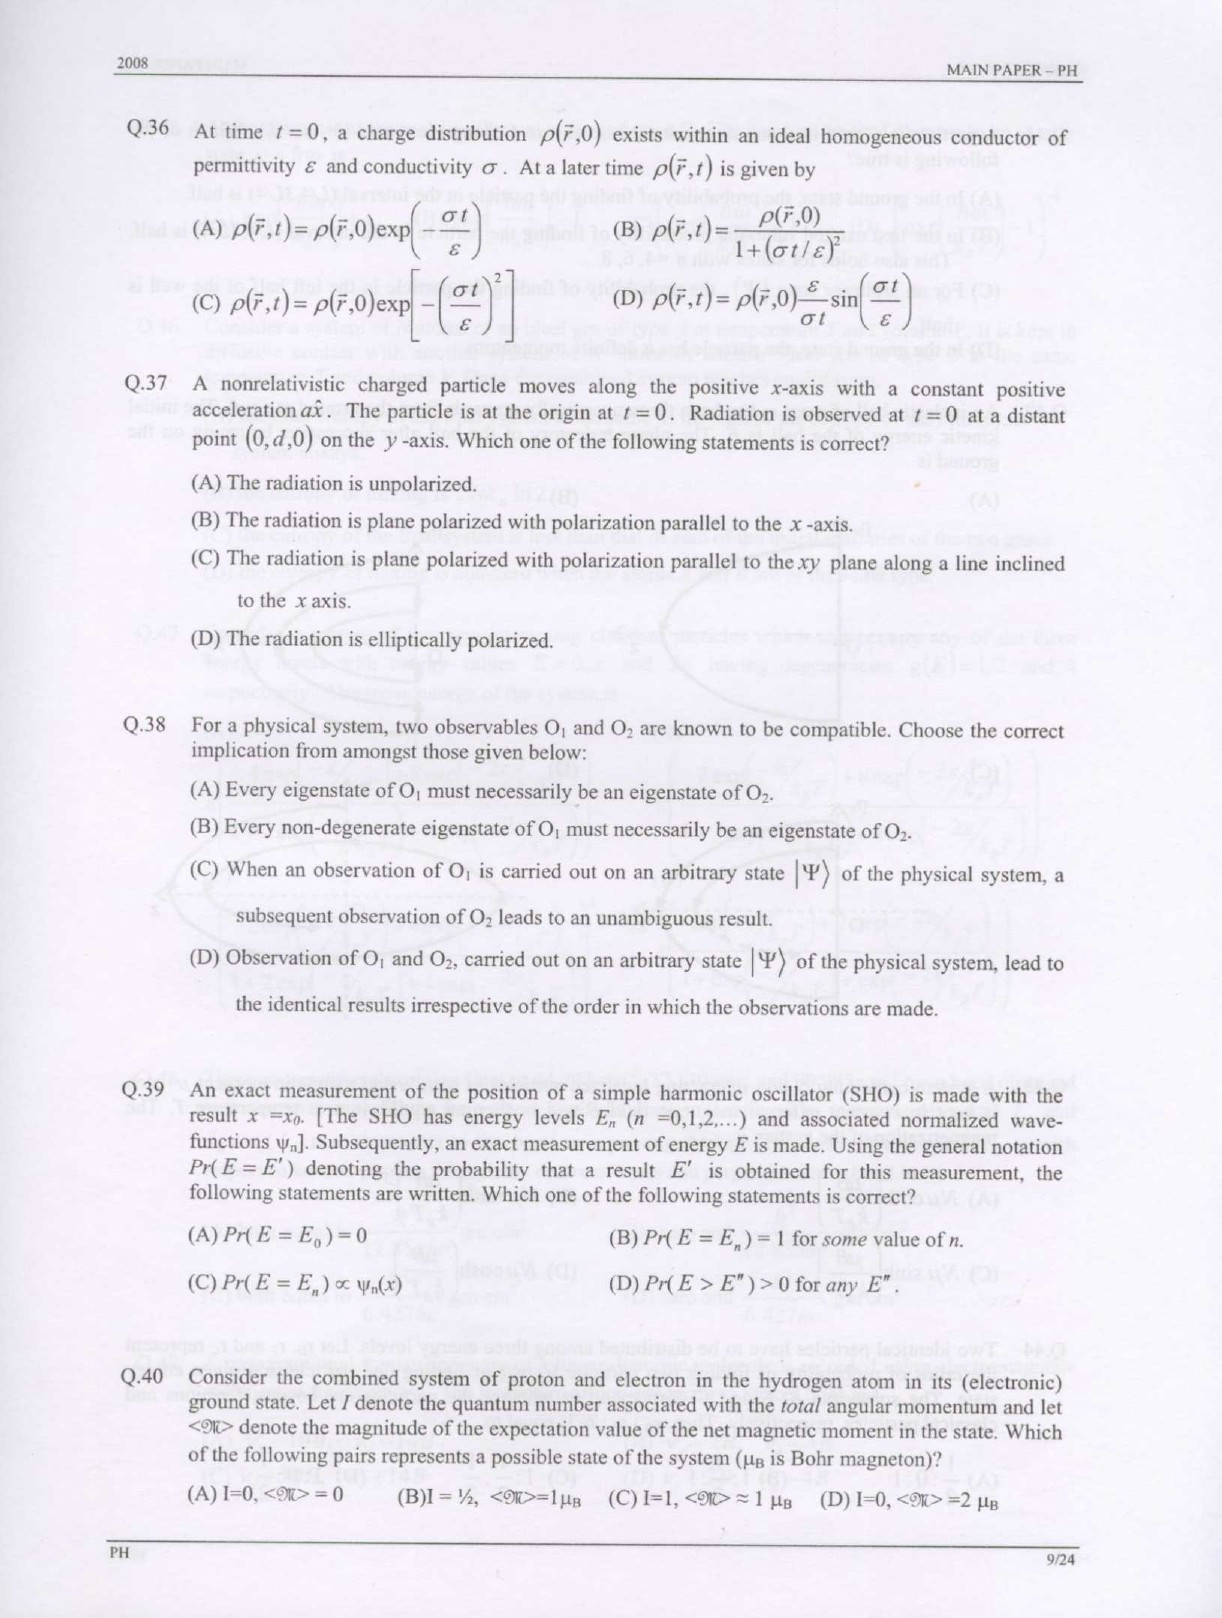 GATE Exam Question Paper 2008 Physics 9